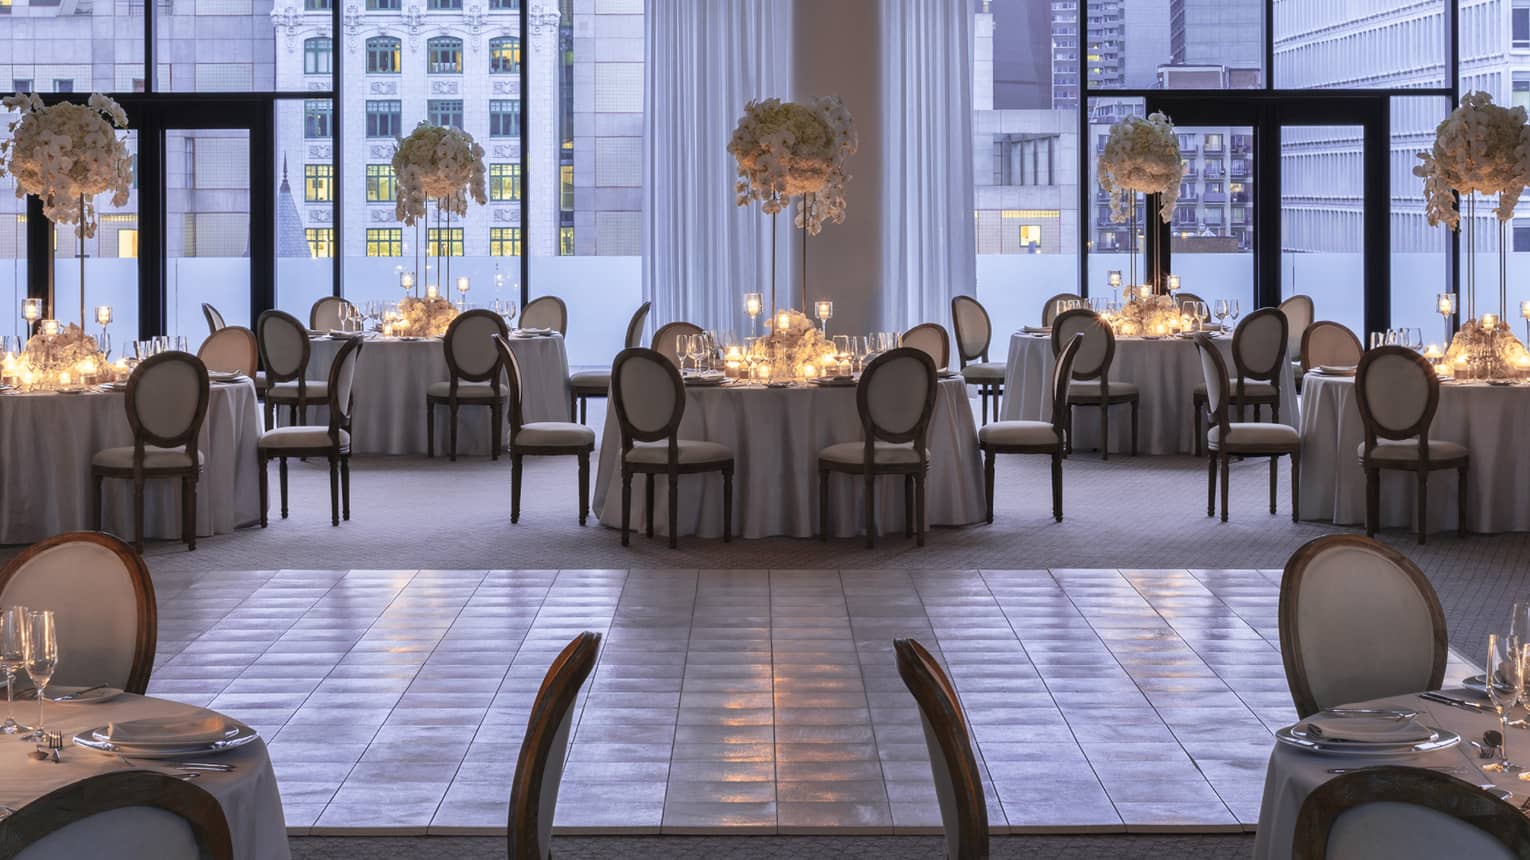 Ballroom with floor-to-ceiling windows overlooking buildings, round tables with candles and large floral displays 